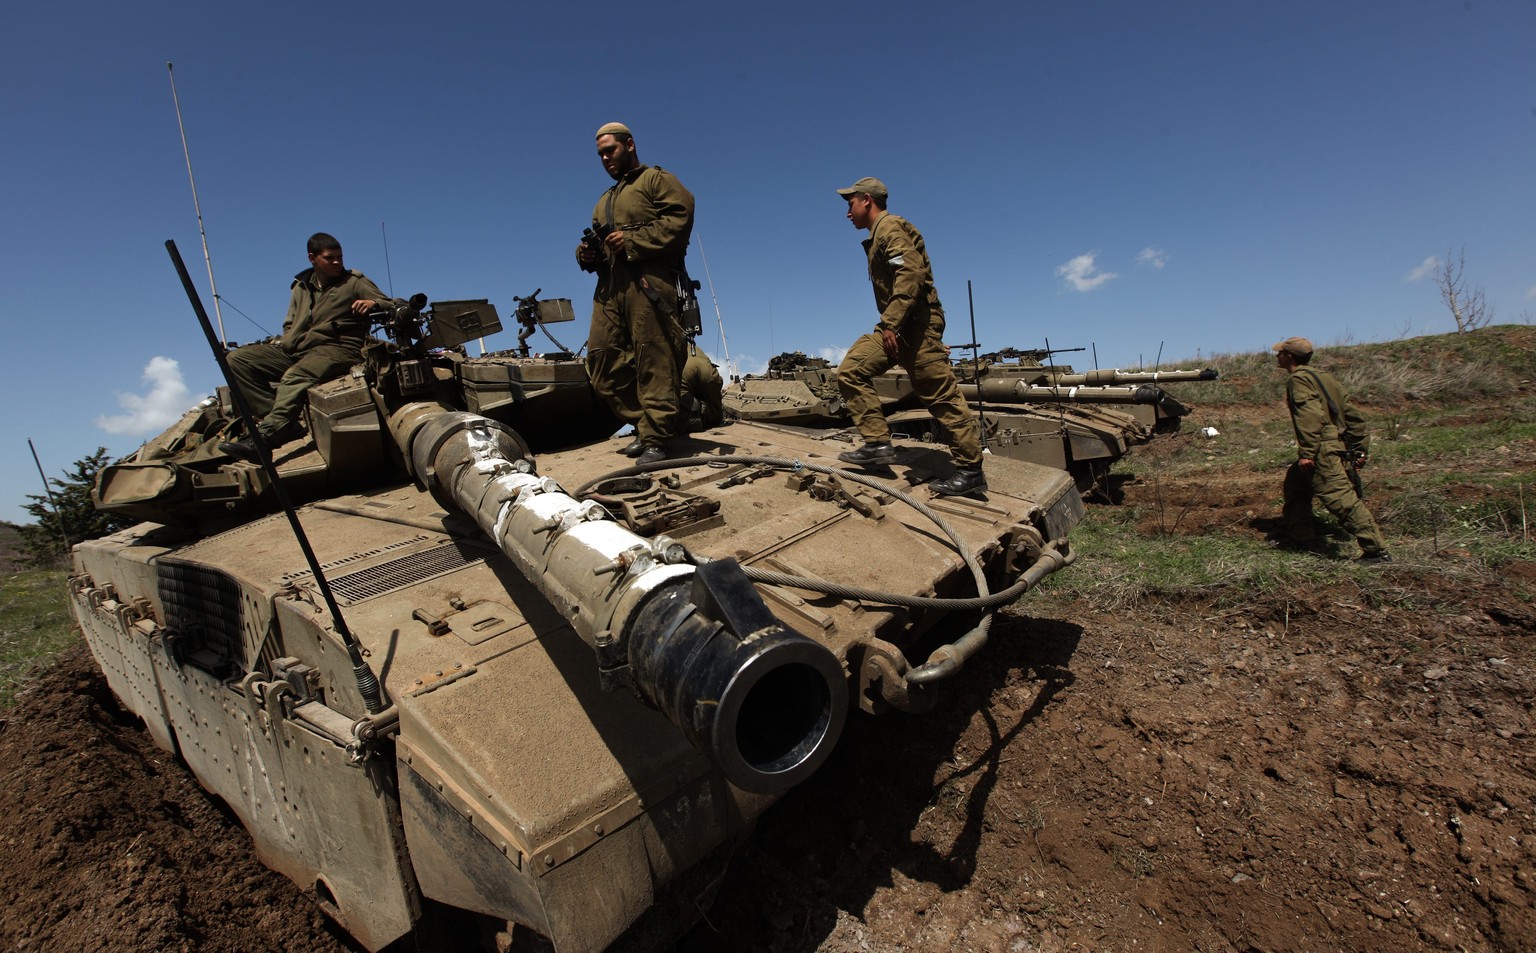 epa04133304 Israeli soldiers on their Merkava tanks deployed next to the Syrian border near the Druze border village of Majdal Shams in the Golan Heights, 20 March 2014. The Israeli army reports the i ...